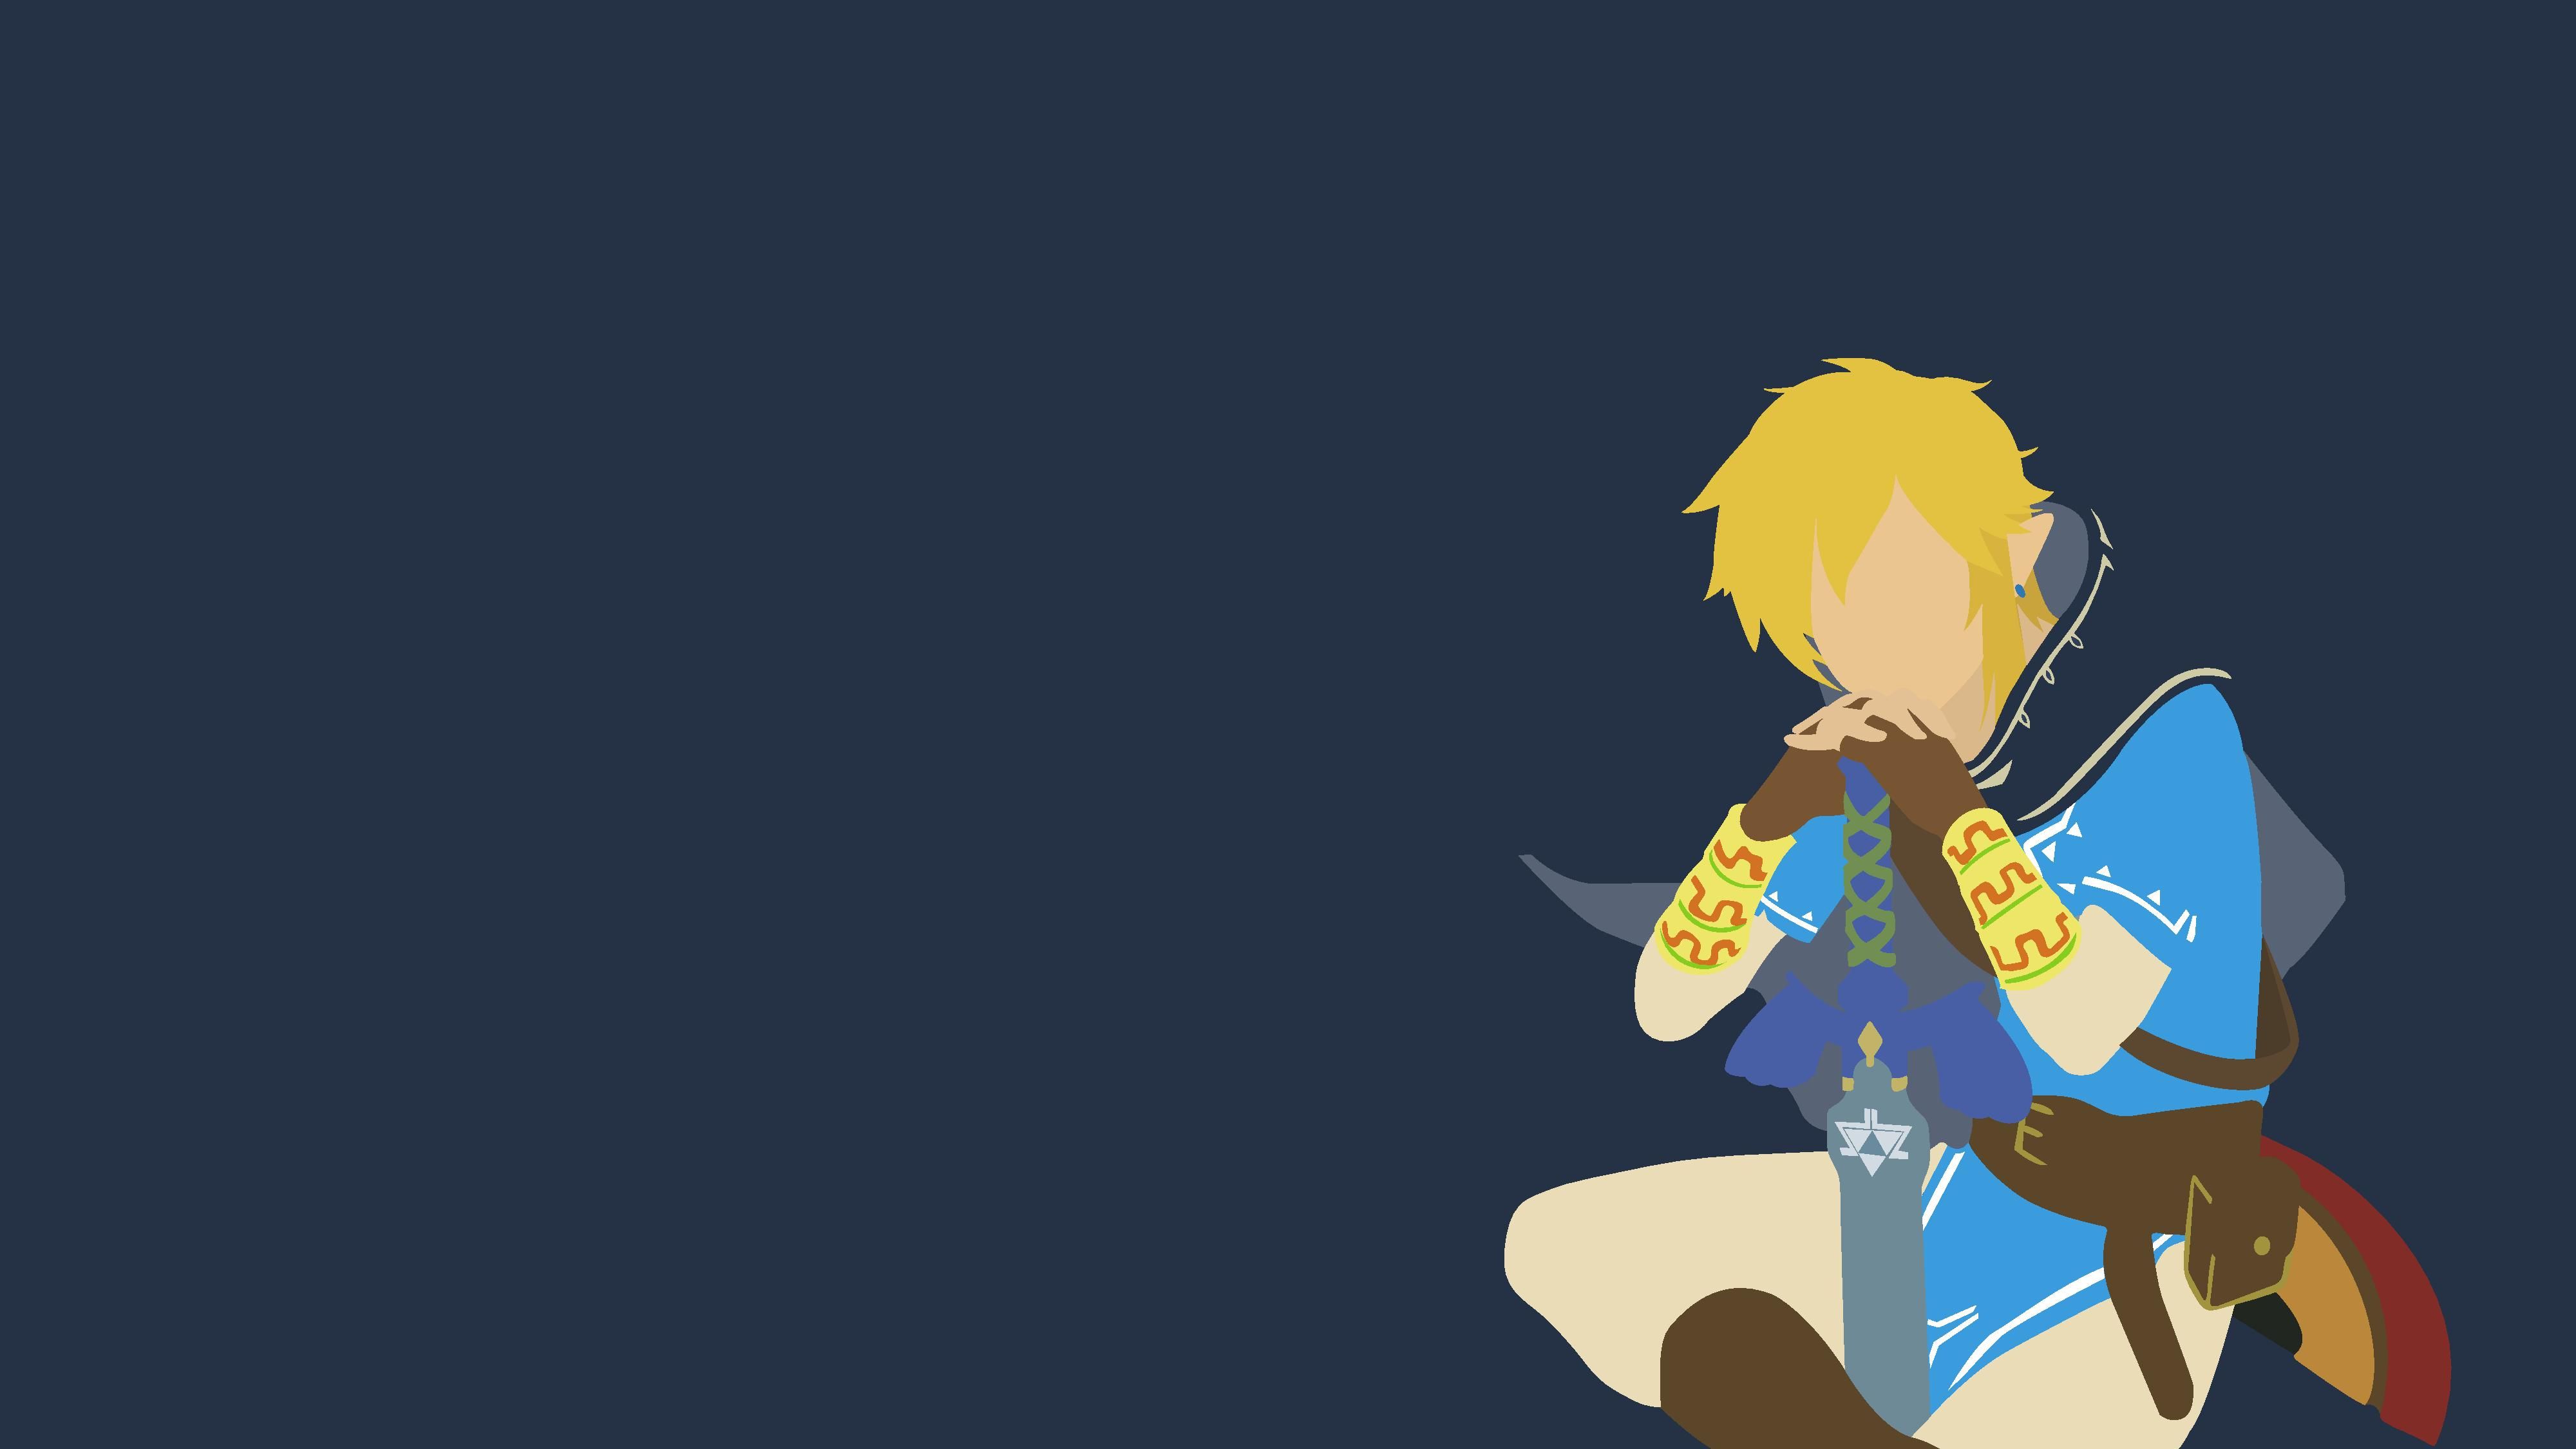 BoTW I made a minimalist wallpaper in my Graphic Design class. (reference image in comments)